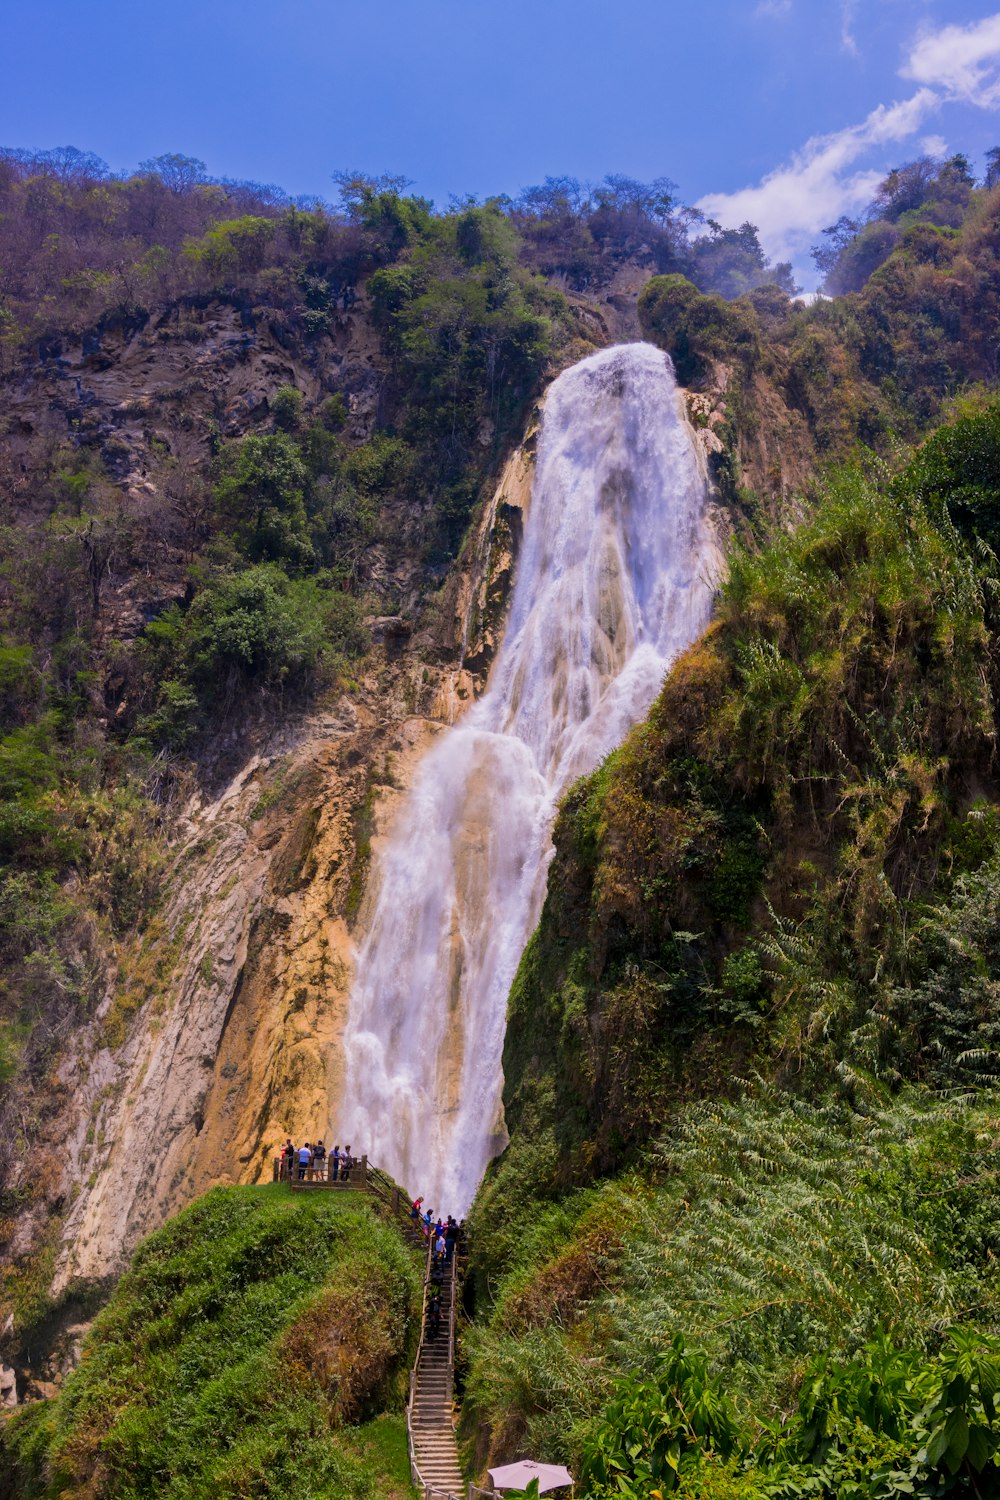 a group of people standing at the base of a waterfall